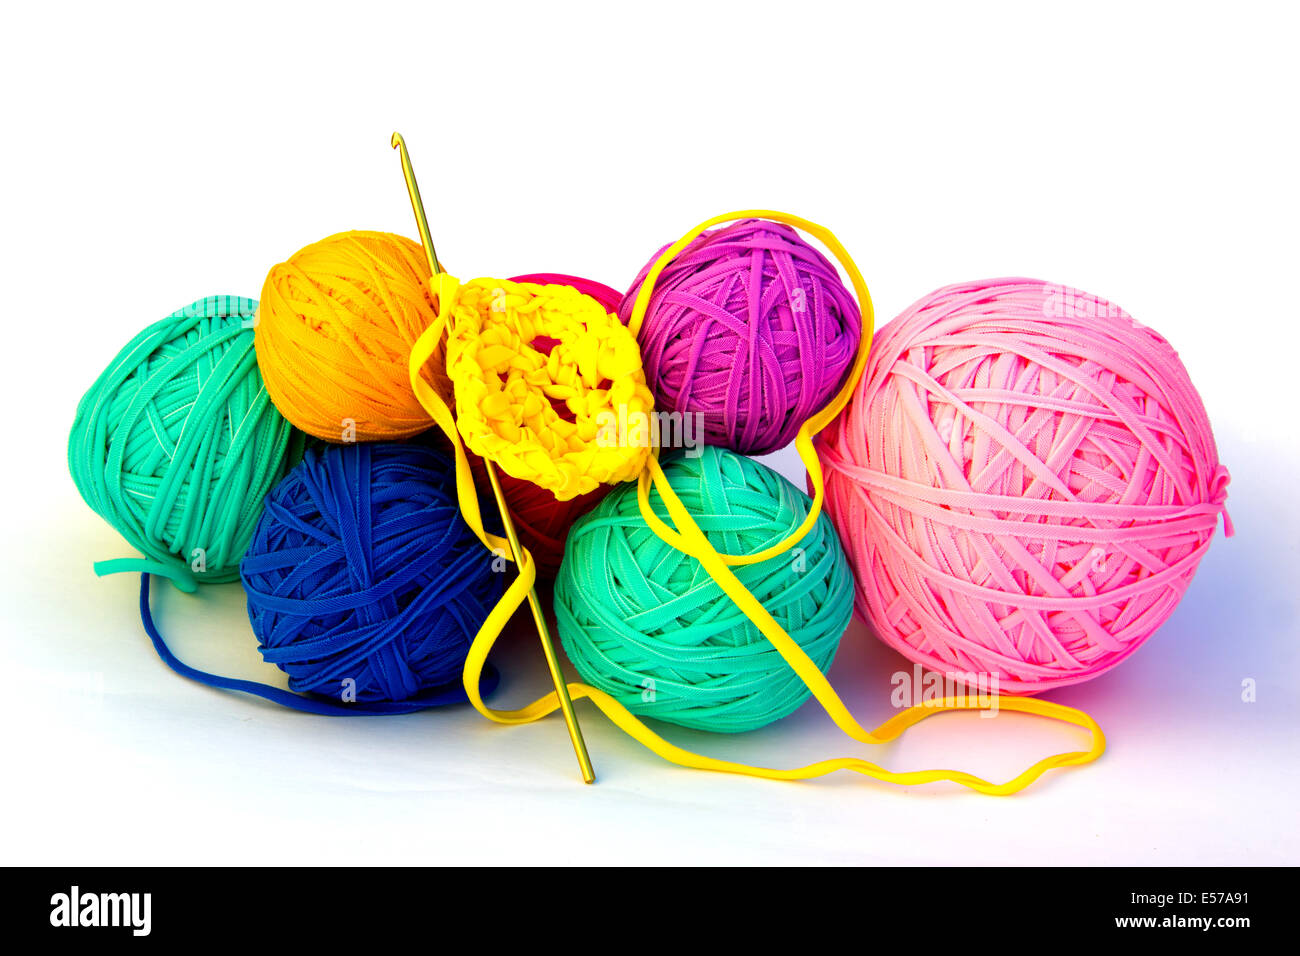 Colorful recycled crochet balls Stock Photo